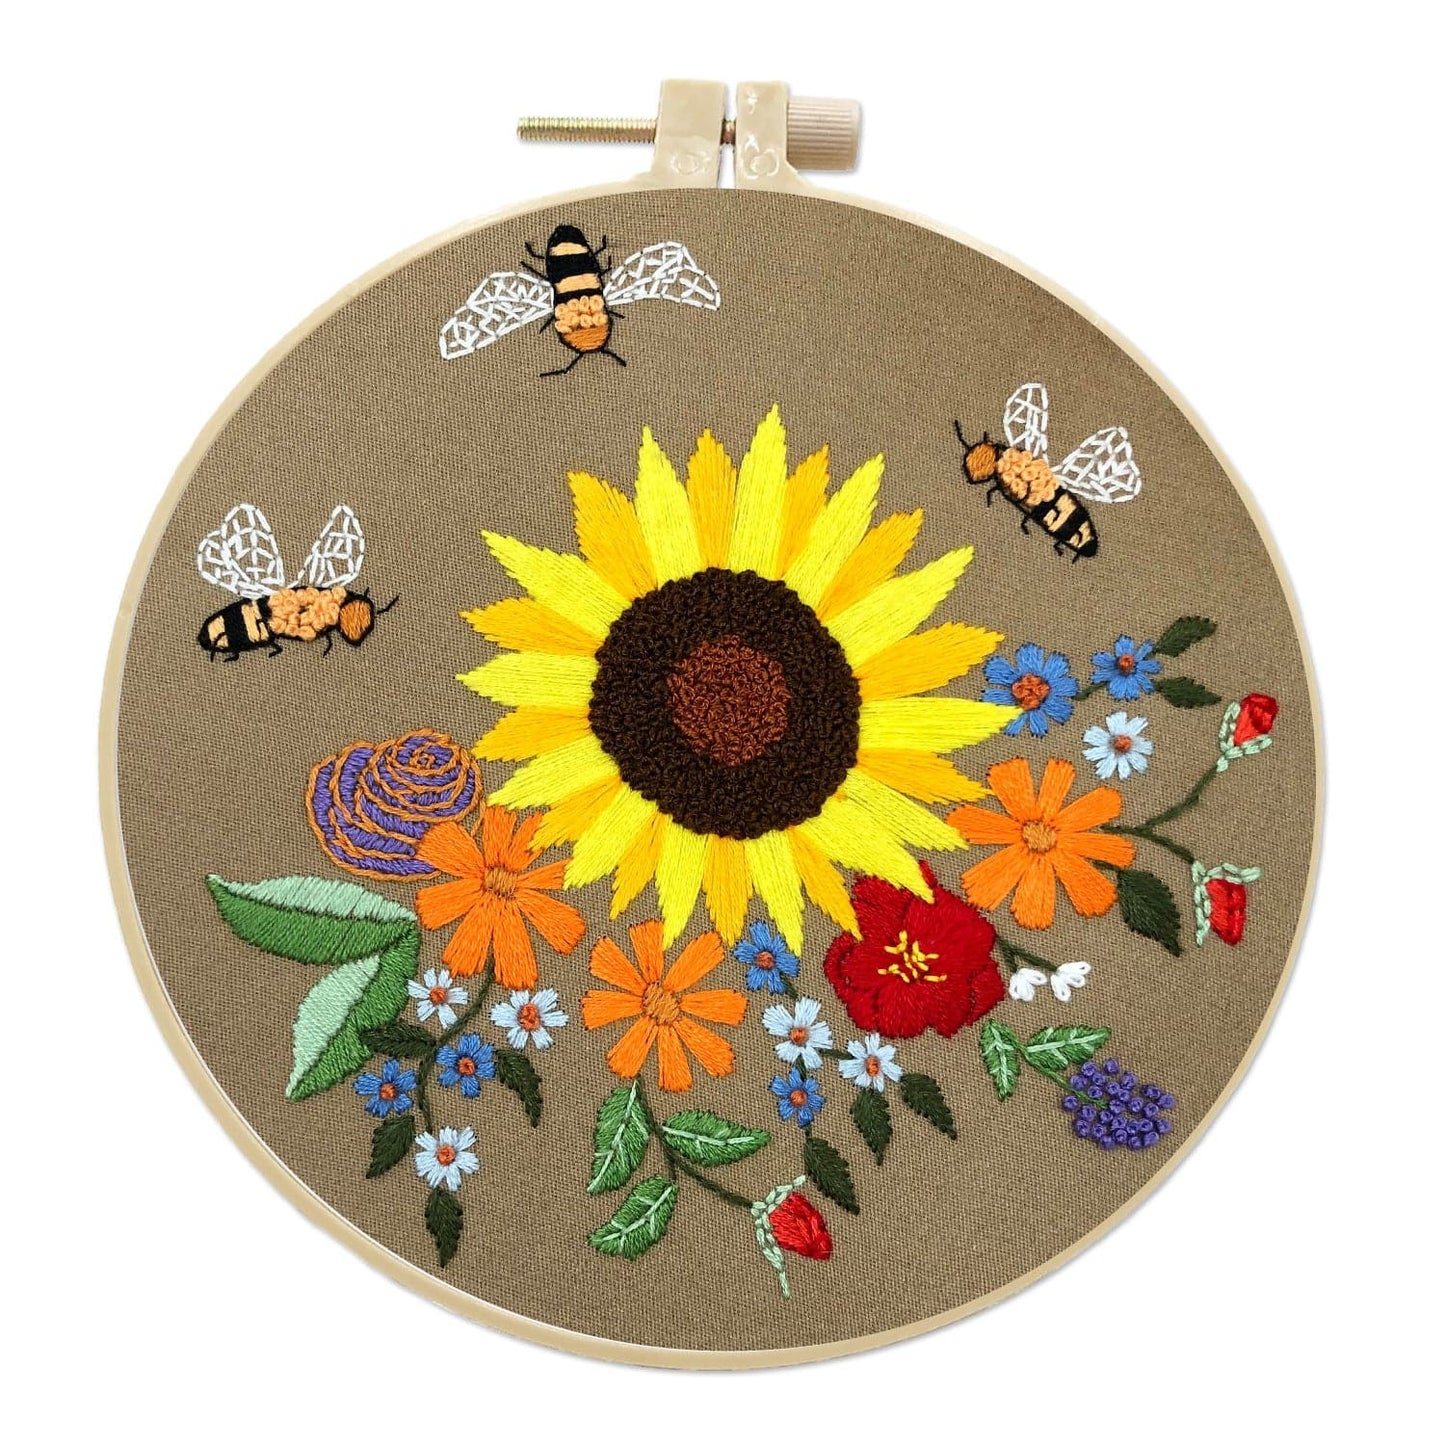 Insects and flowers - Embroidery ktclubs.com